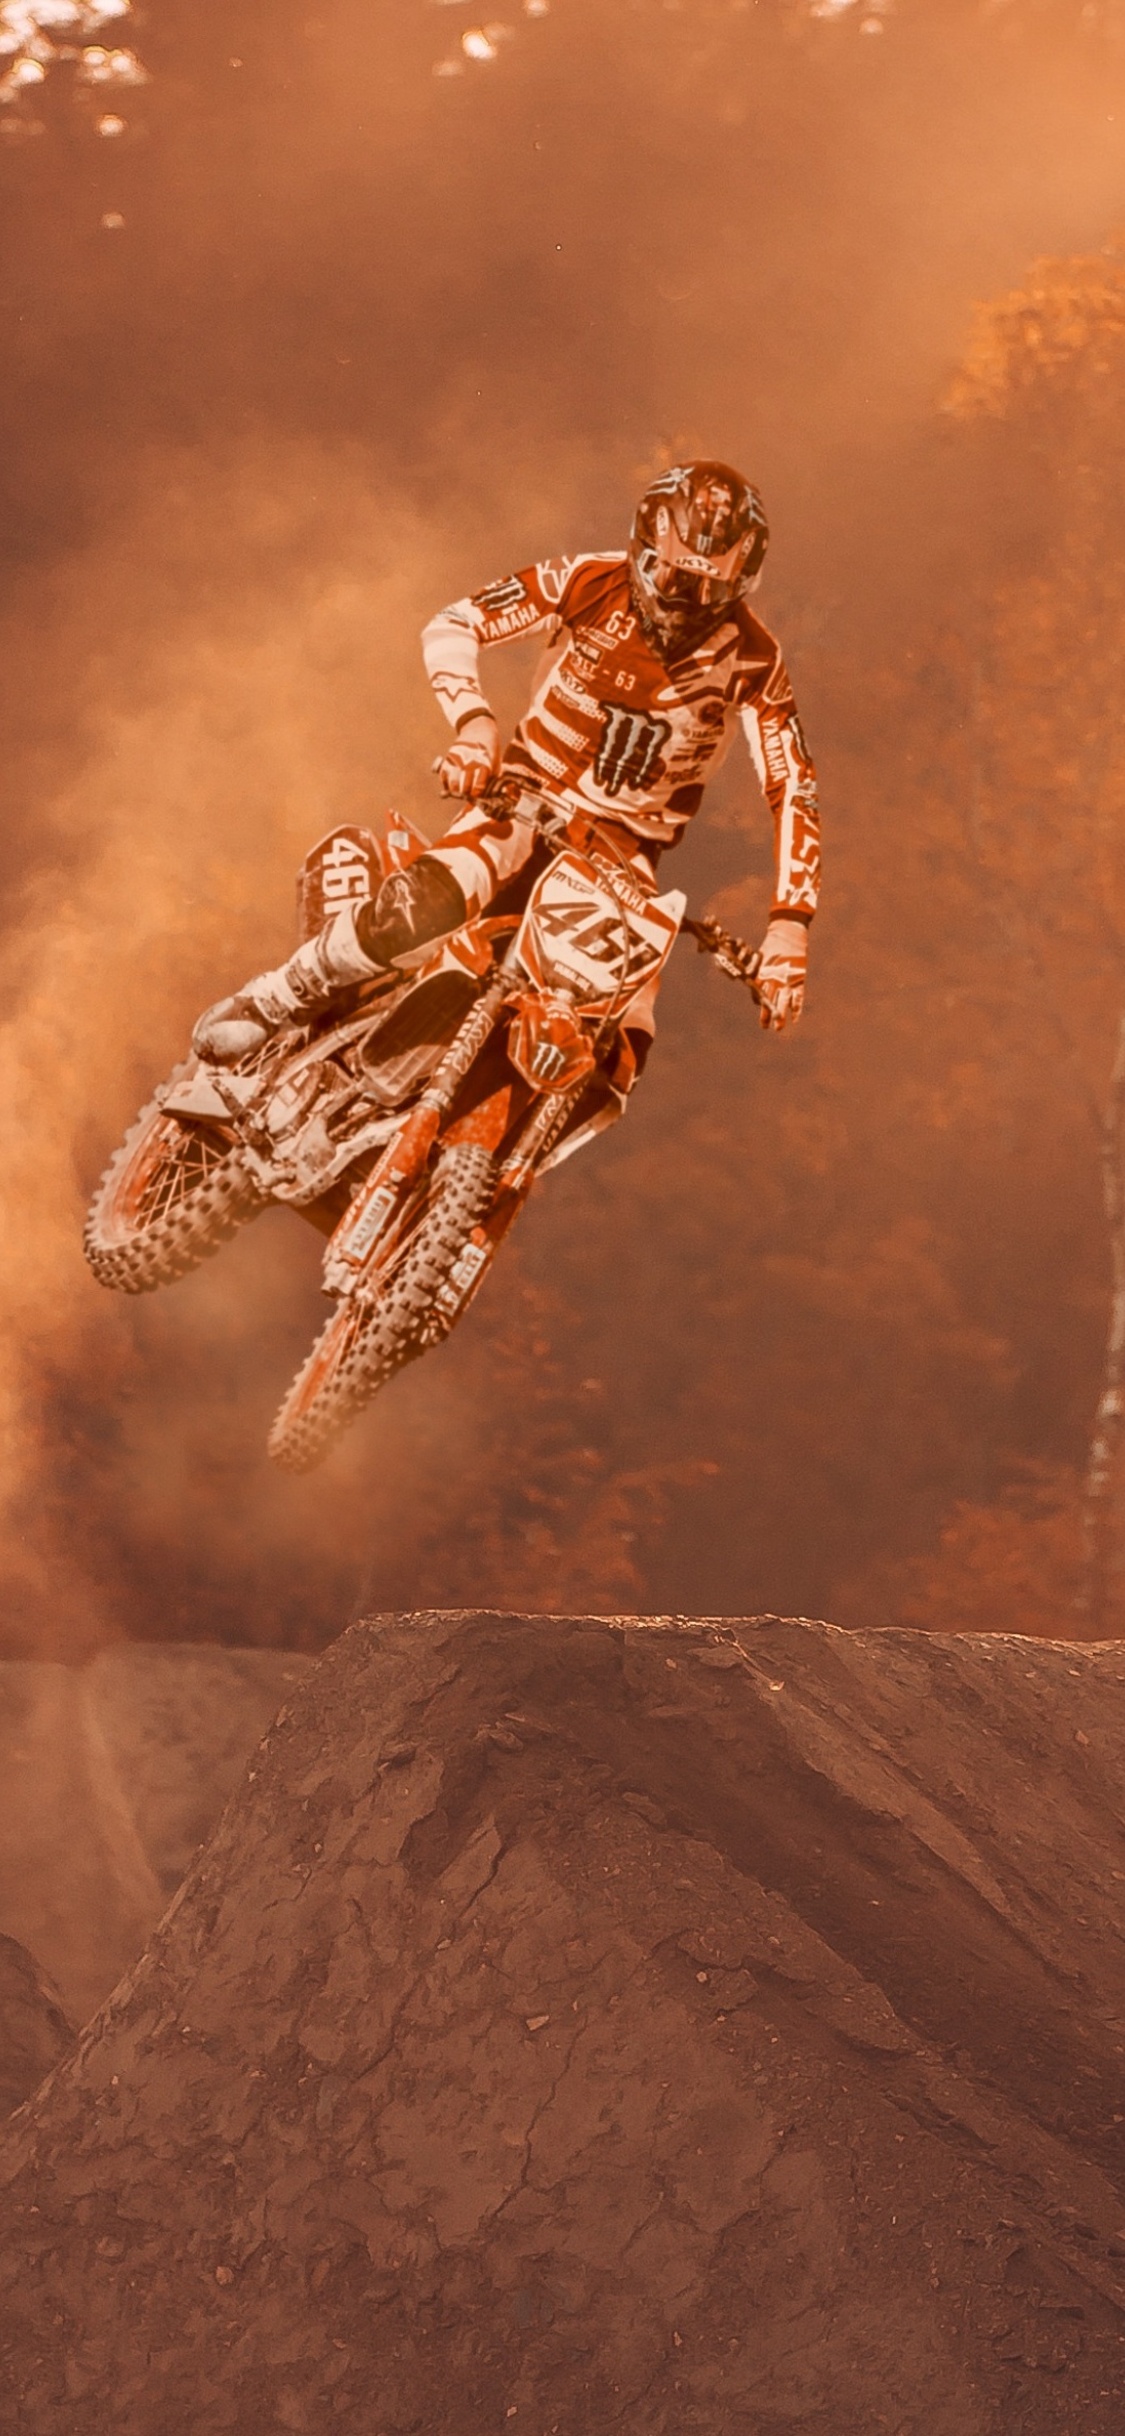 1080x1920 Enduro Motorcycle Wallpapers for IPhone 6S 7 8 Retina HD